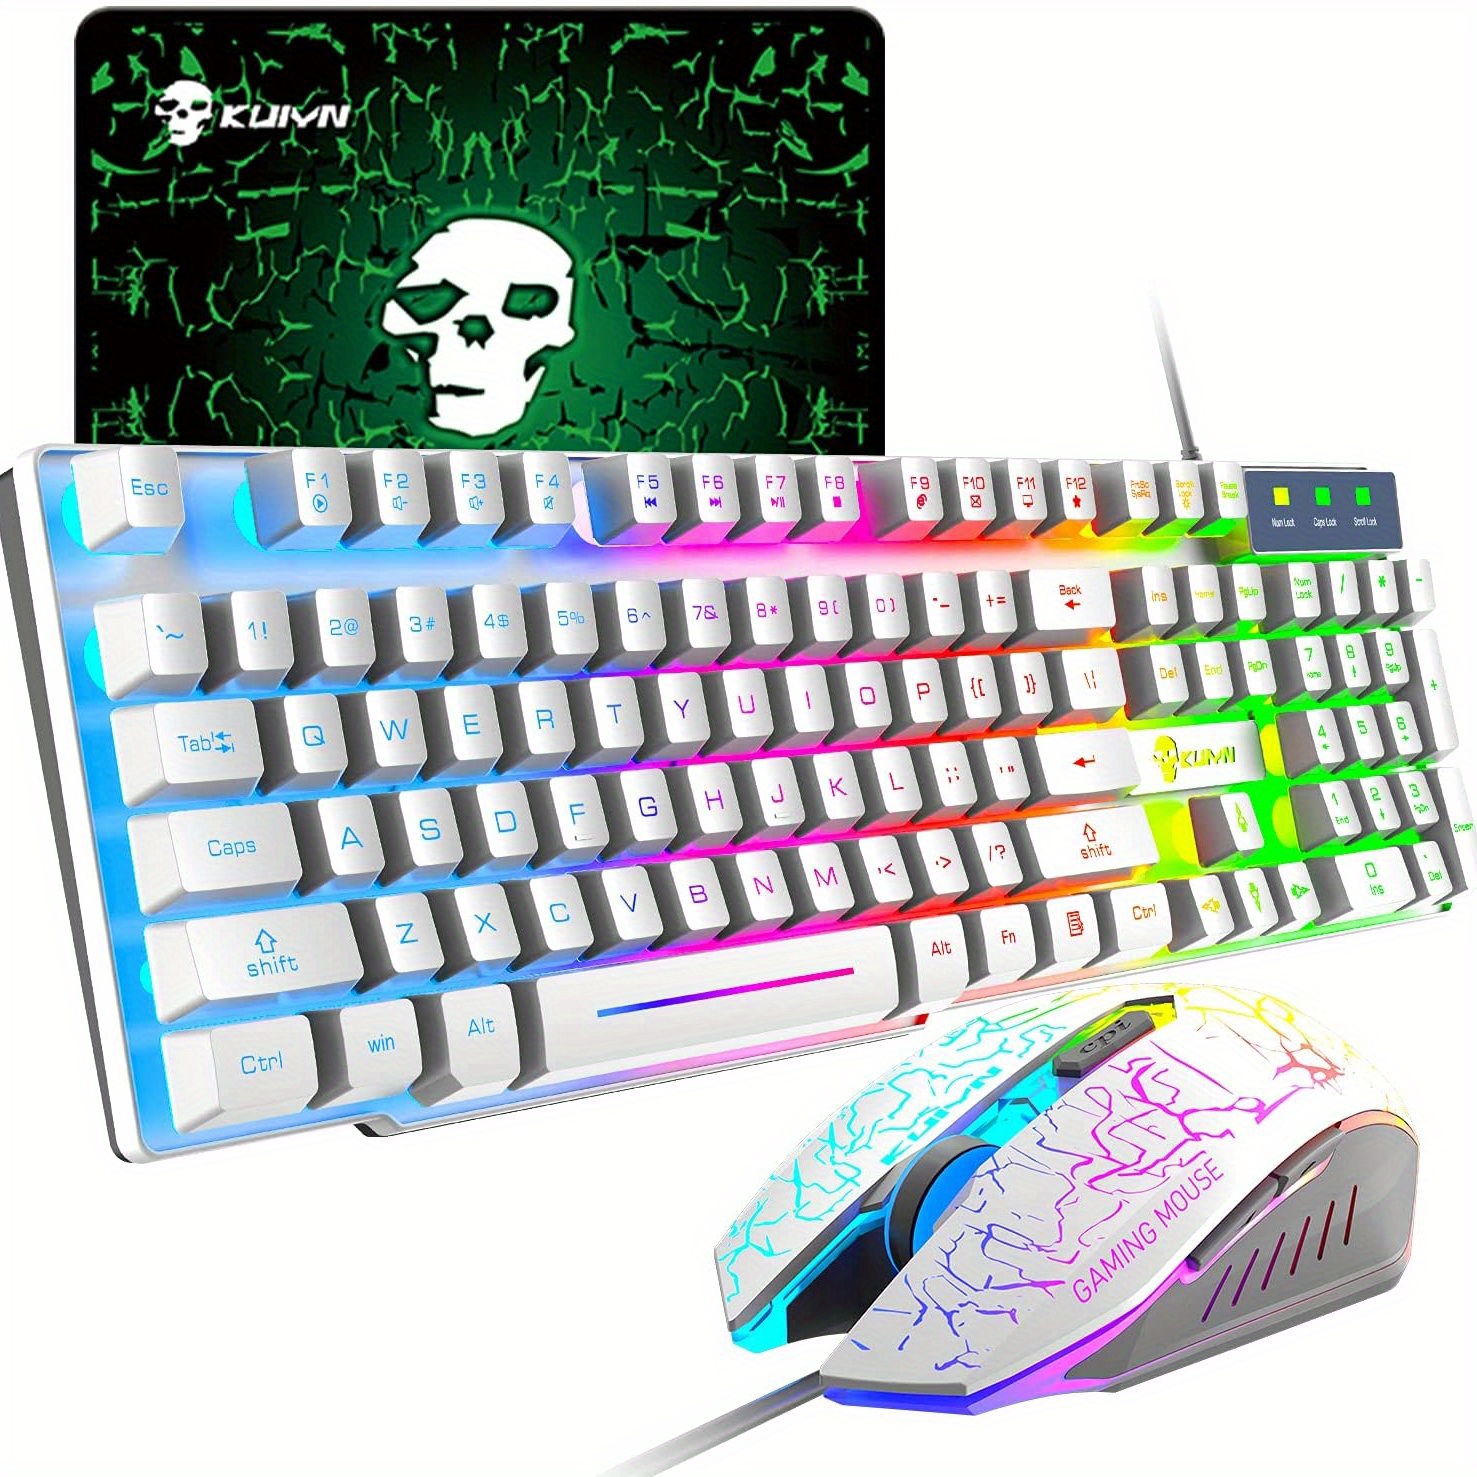 Wired Mechanical Feel Gaming Keyboard And Mouse Set Rainbow LED 104 Keys  USB Illuminated Light Up Keyboard 2400DPI 6 Buttons Optical Gaming Mouse  Mice